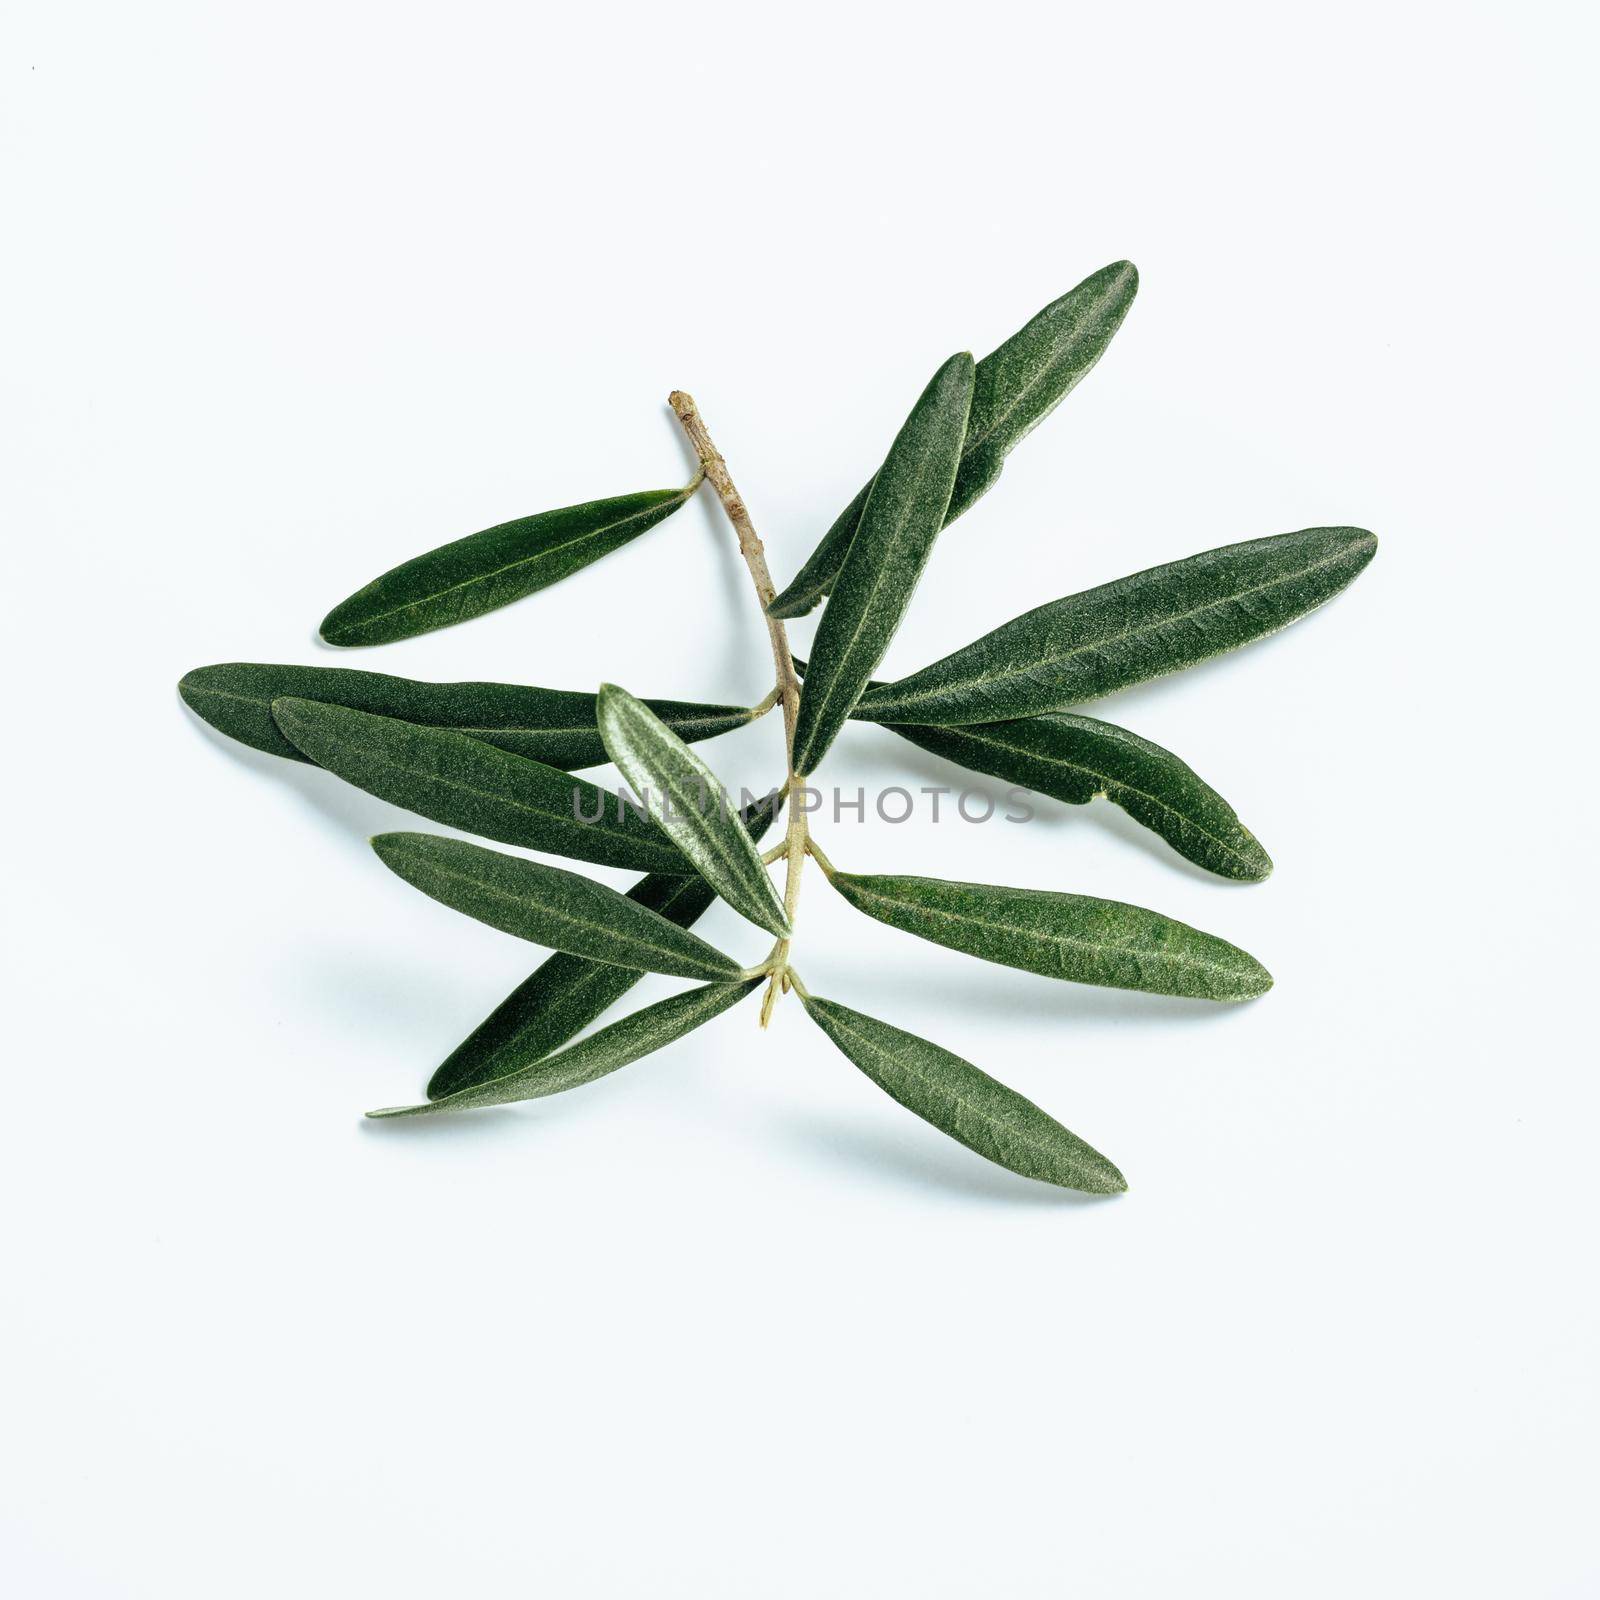 Olives tree branch on white background. Fresh green olive leaves on branch isolated on white with clipping path